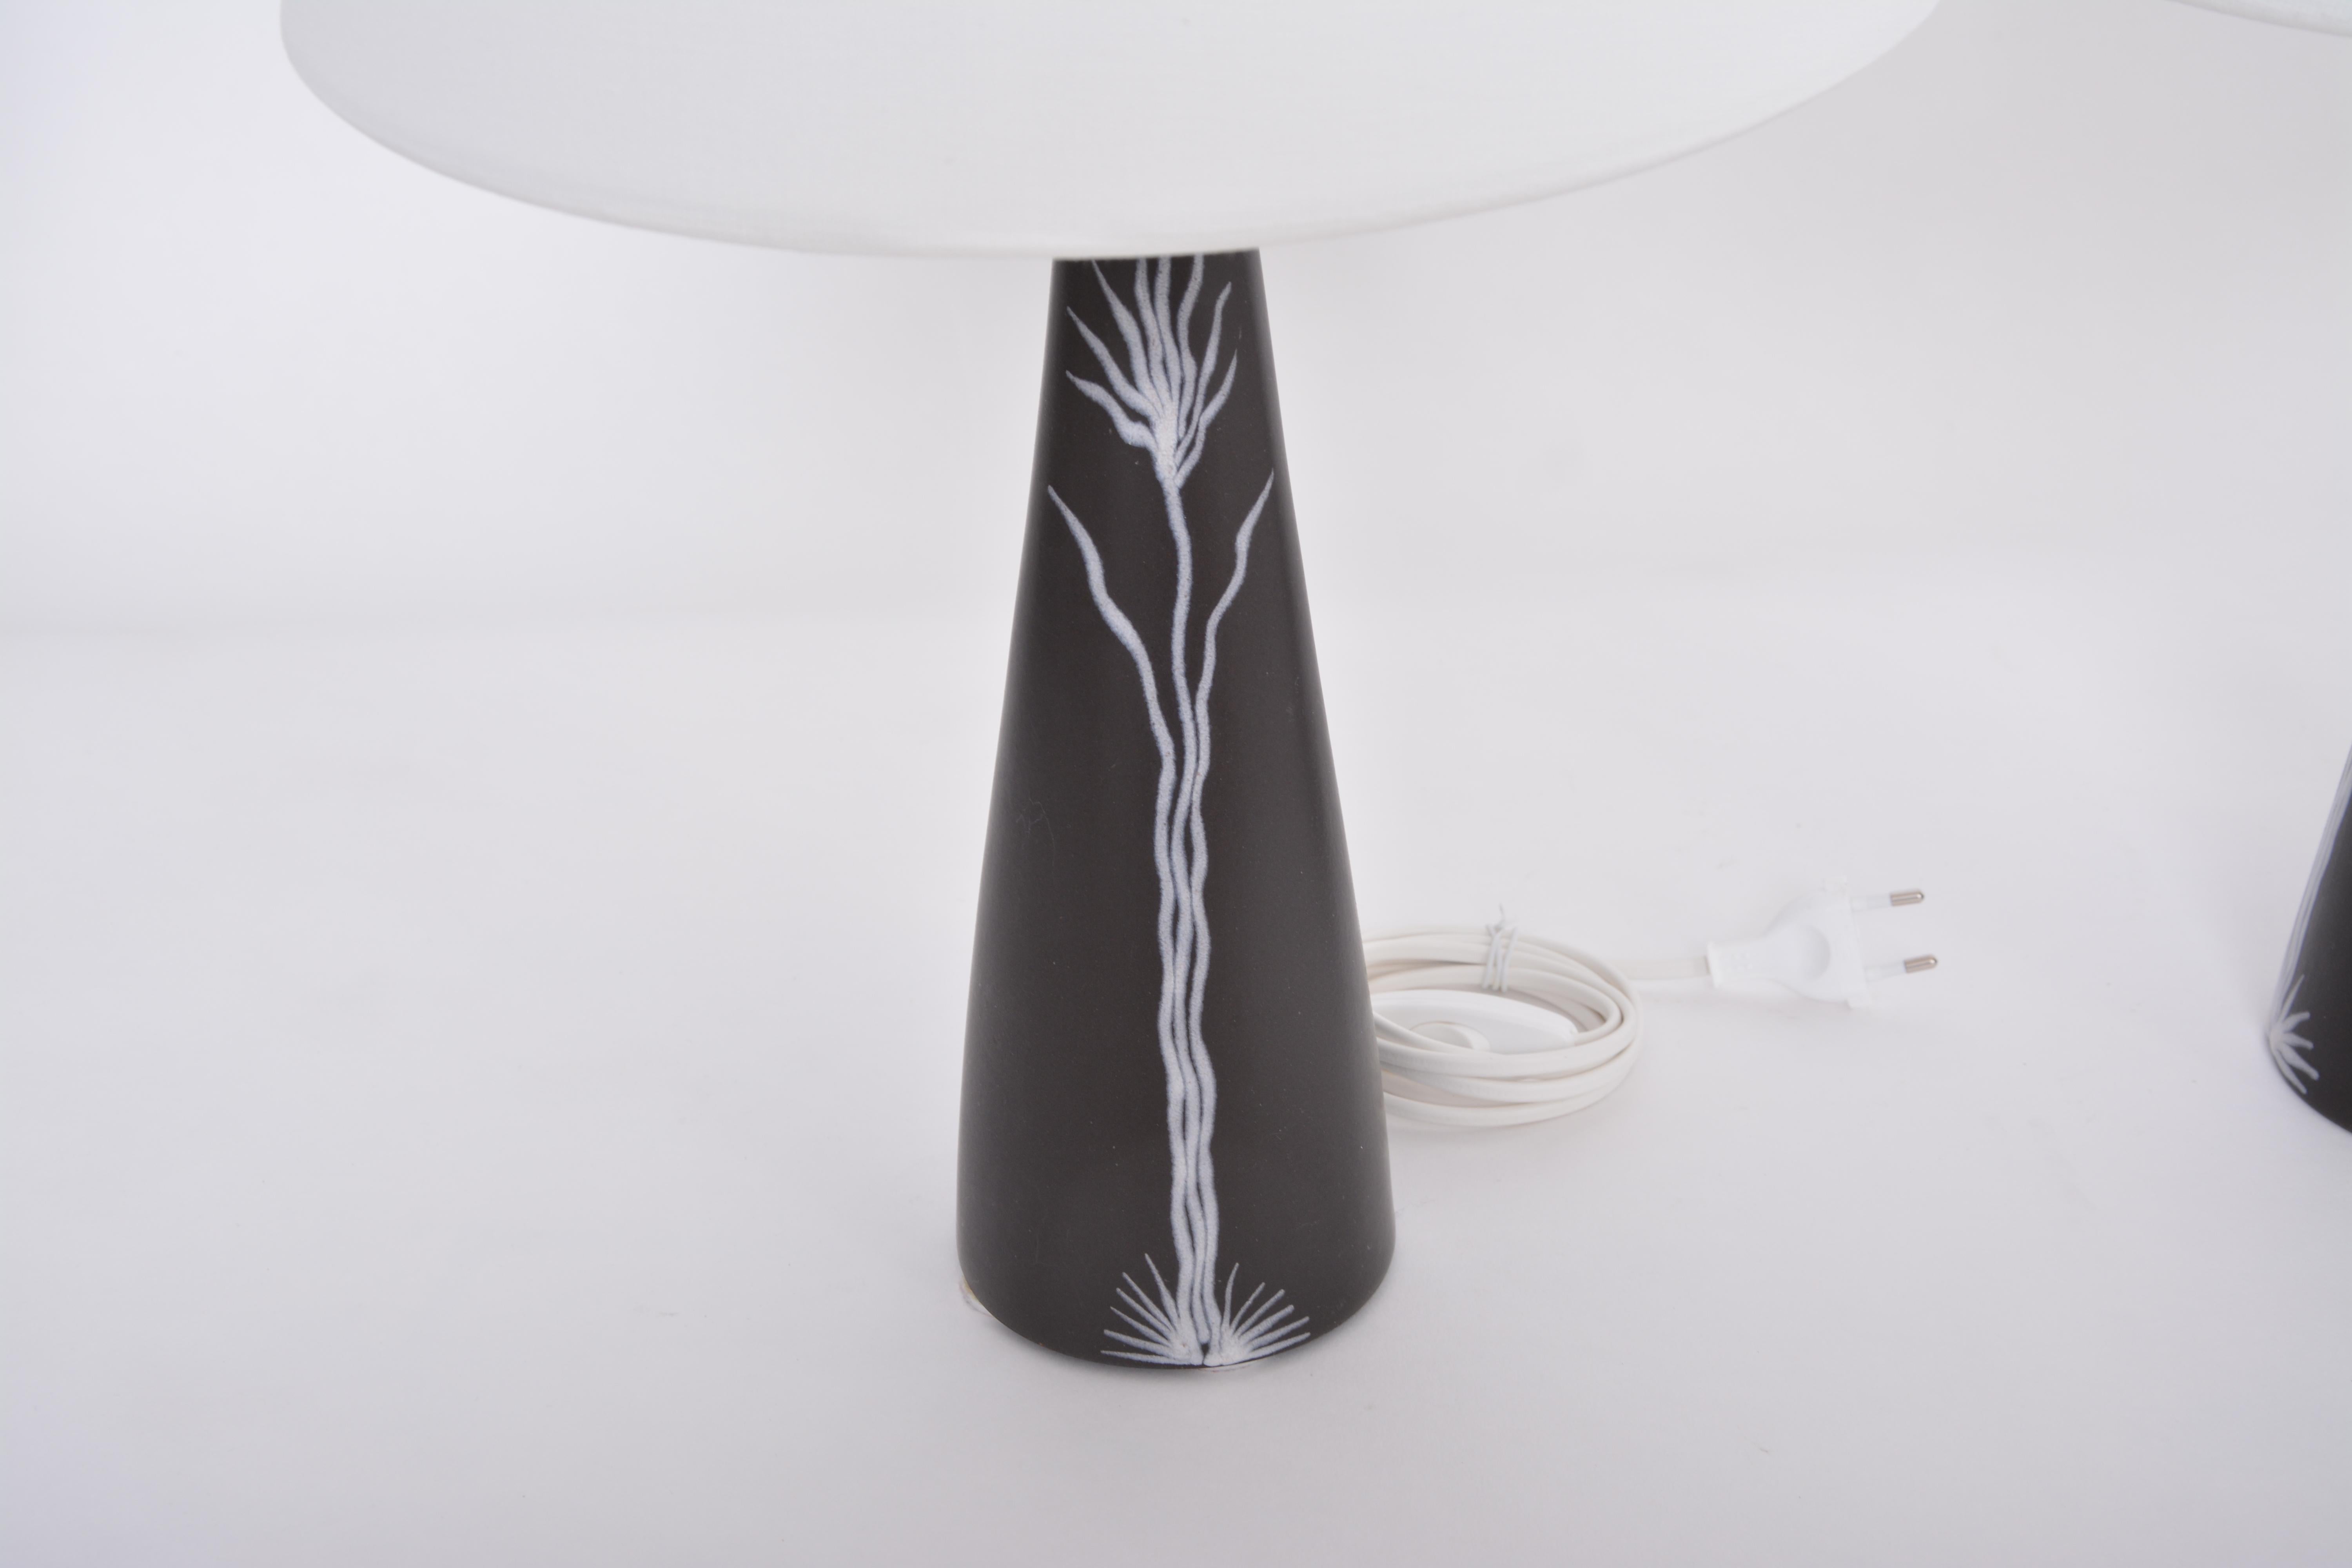 Pair of black Danish midcentury Ceramic table lamps by Holm Sorensen for Søholm

These beautiful table lamps were designed by Holm Sørensen and Svend Aage Jensen for Danish company Søholm. The design is from their series 